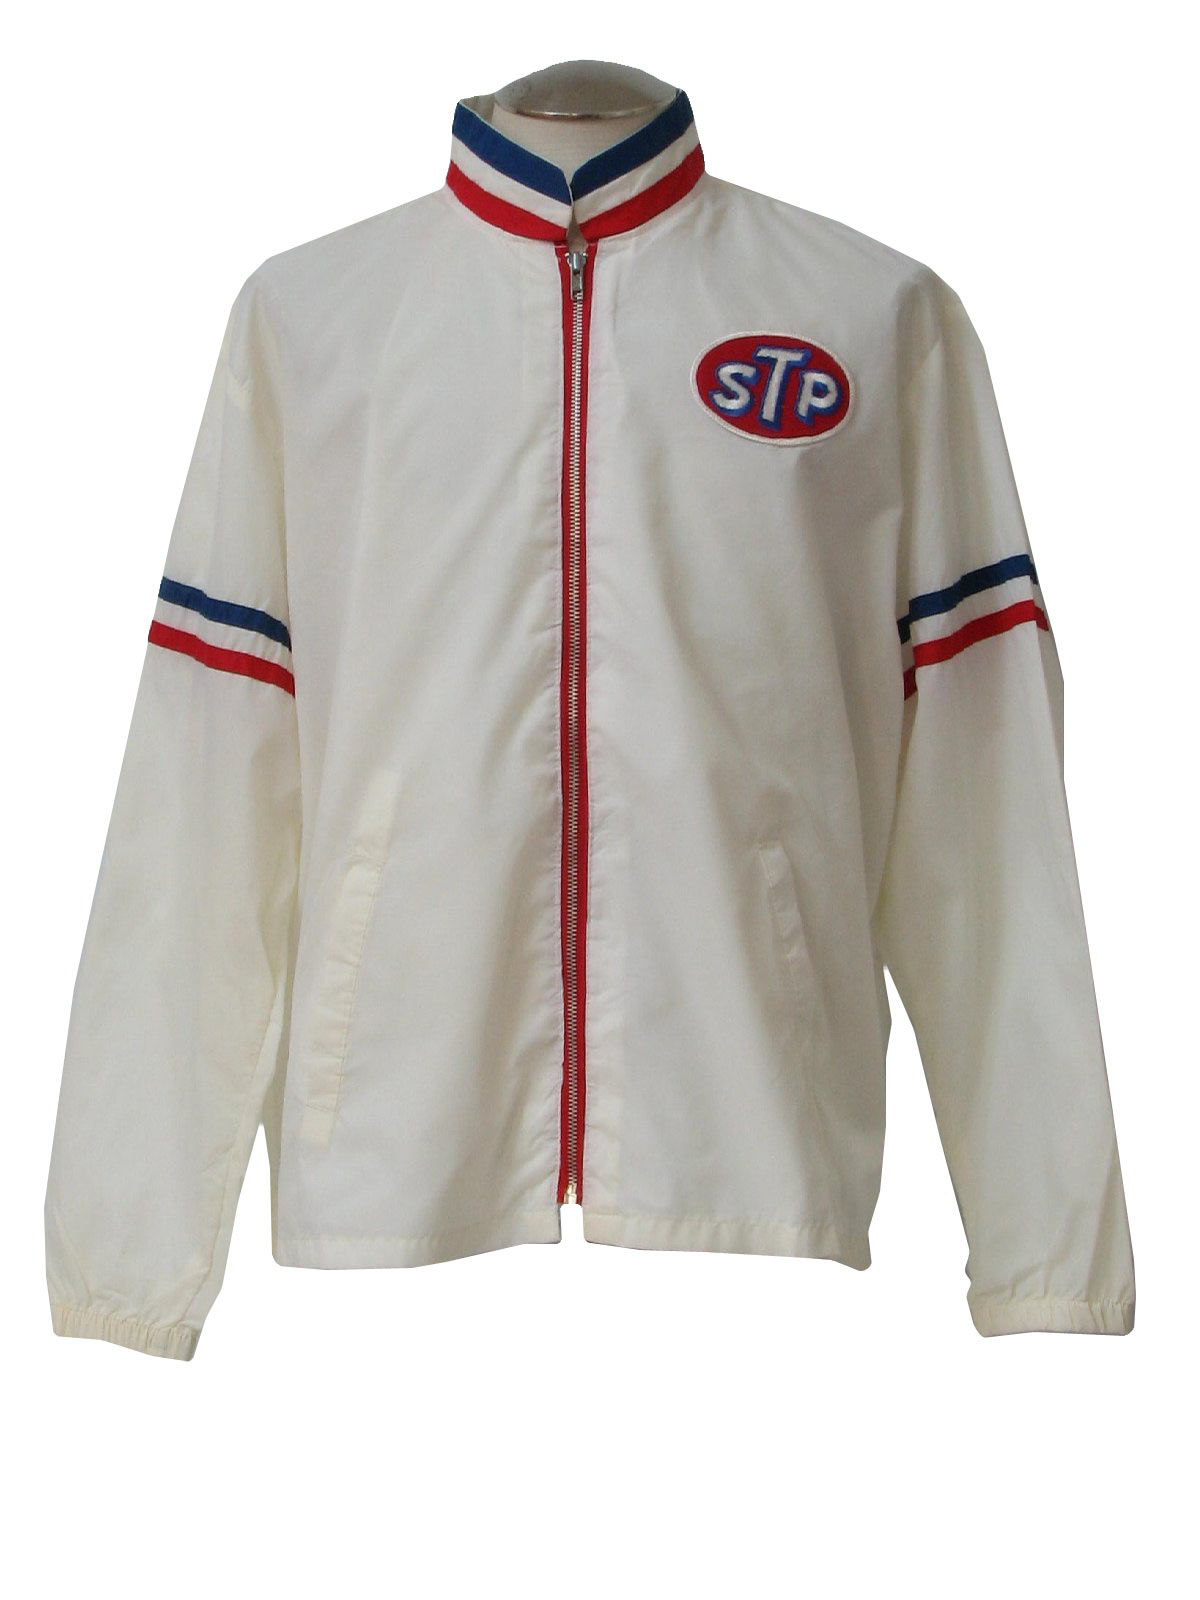 1970's Vintage Don Jac Jacket: 70s or early 80s -Don Jac- Mens white ...